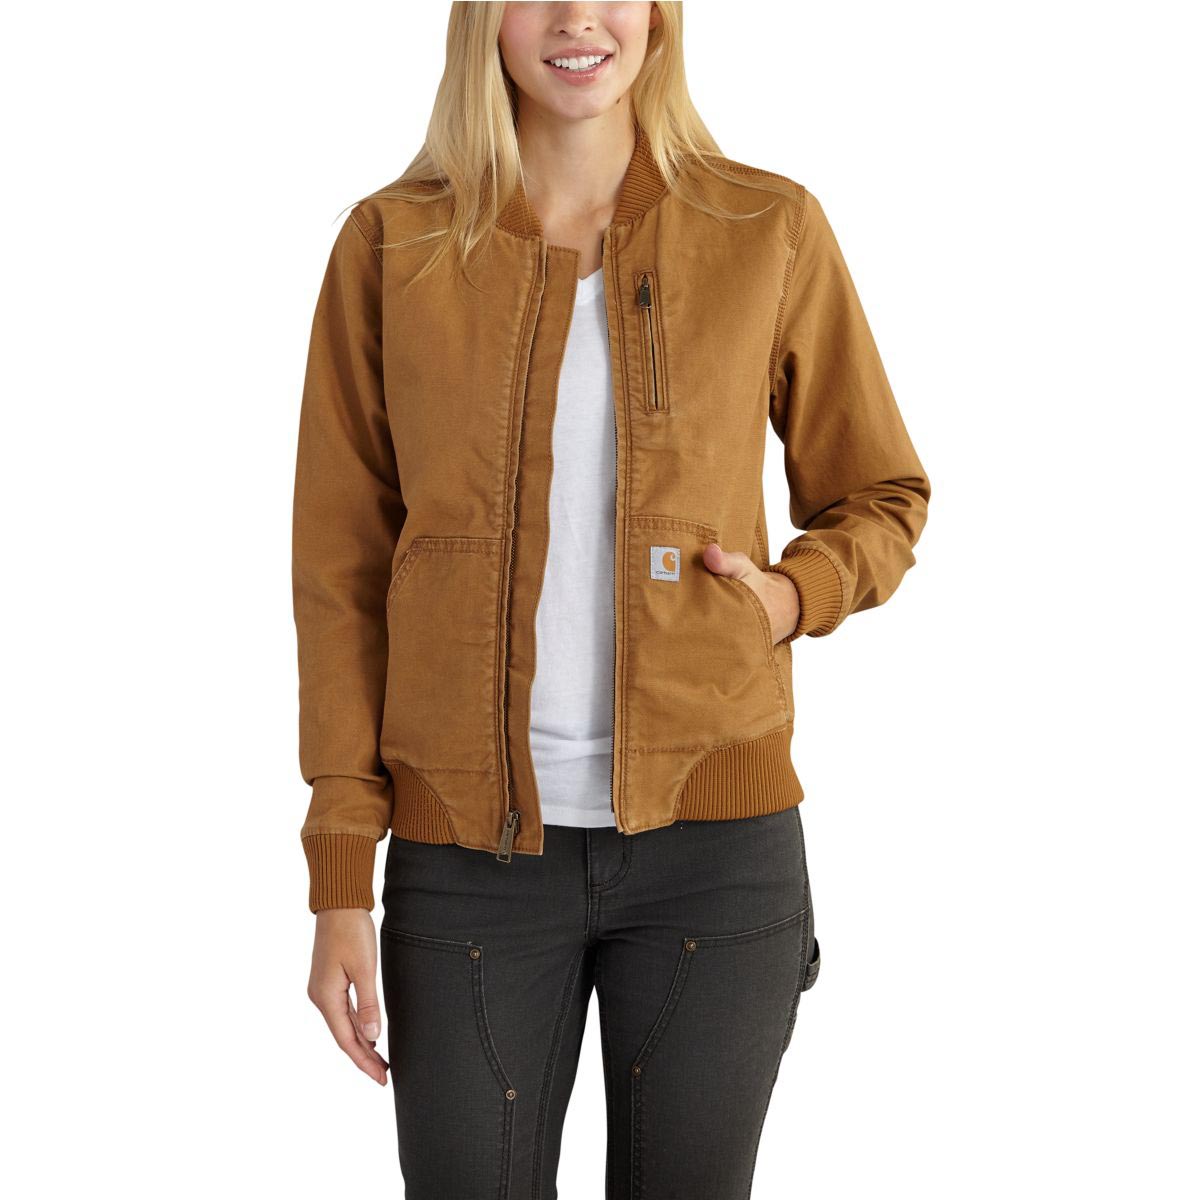 Carhartt Women's Rugged Flex Loose Fit Canvas Double-Front Work